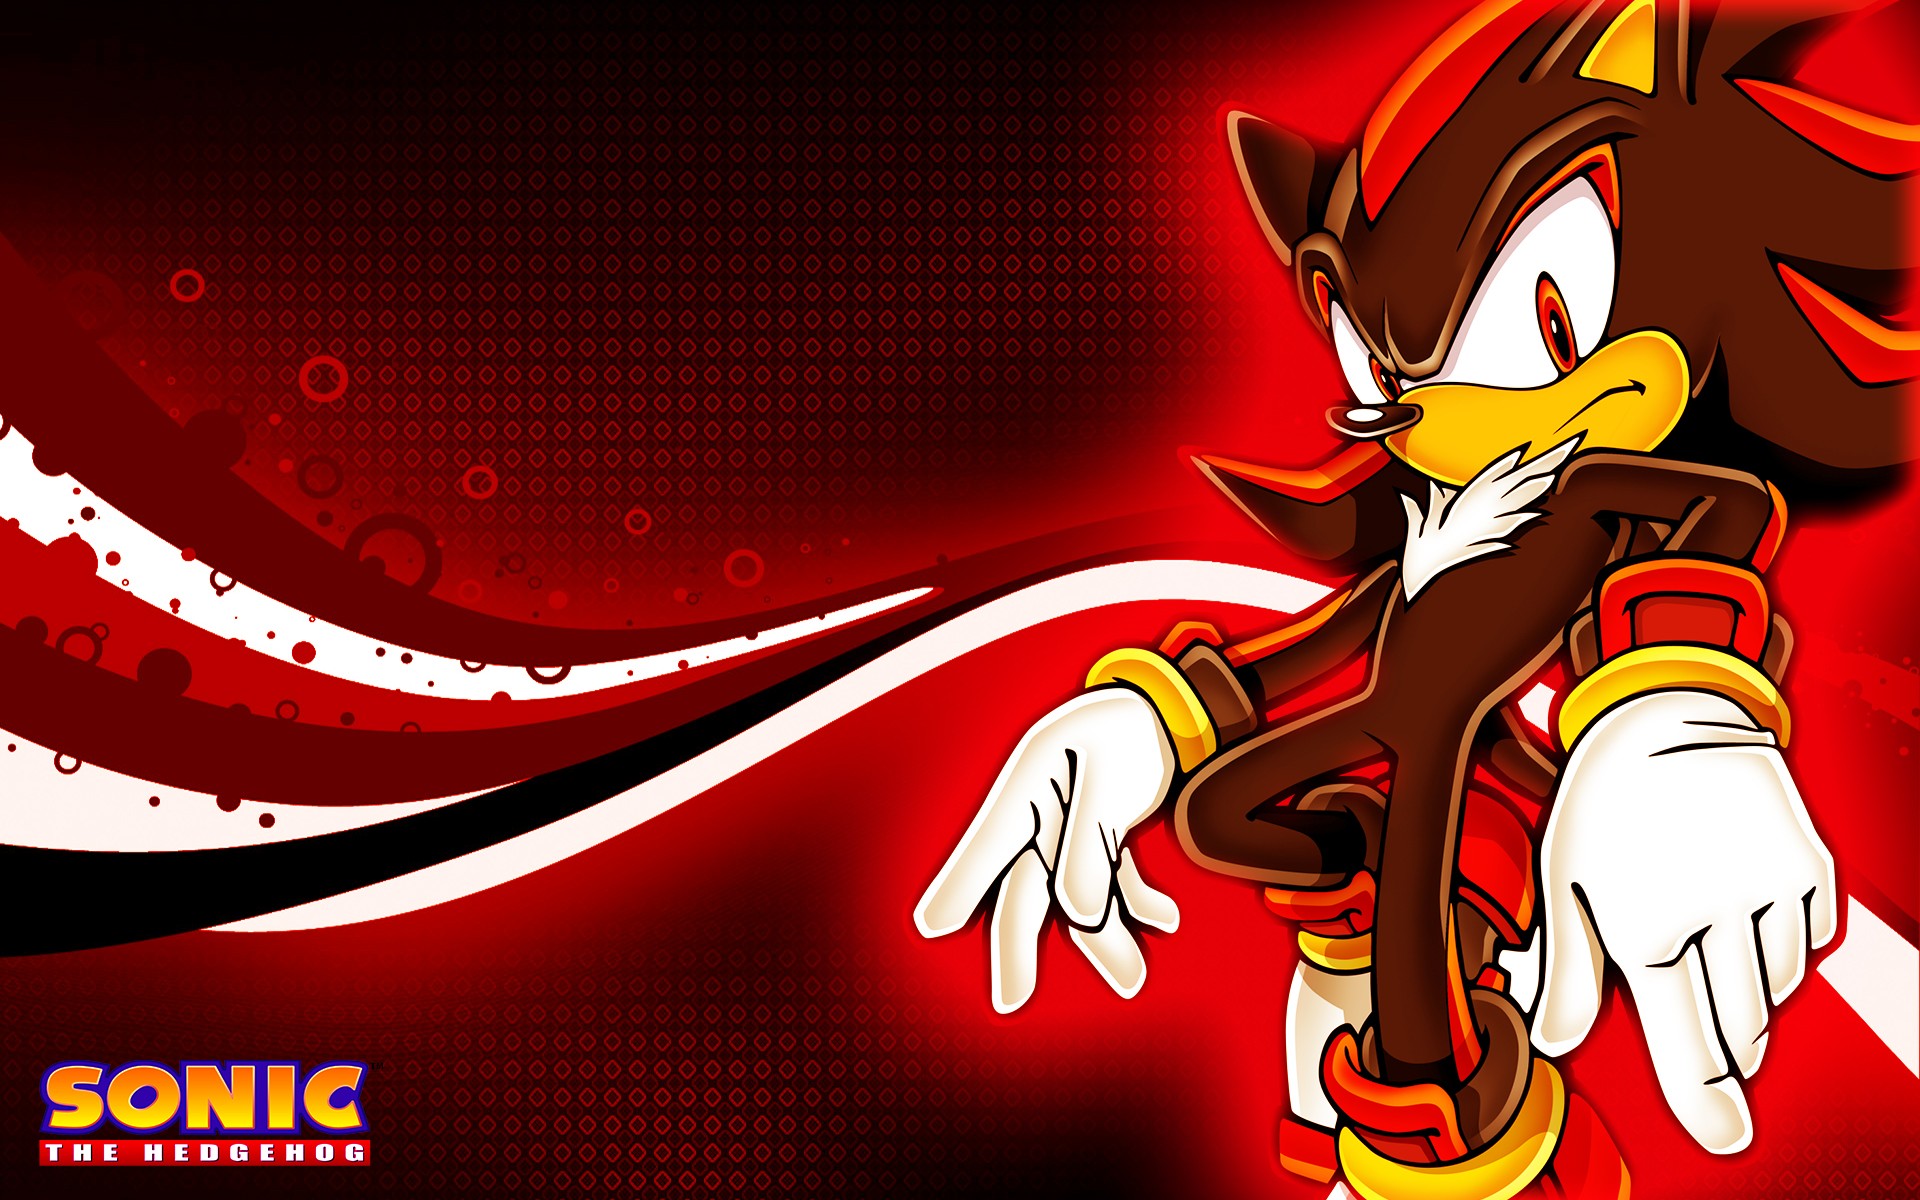 shadow the hedgehog wallpaper,cartoon,fictional character,games,anime,graphic design